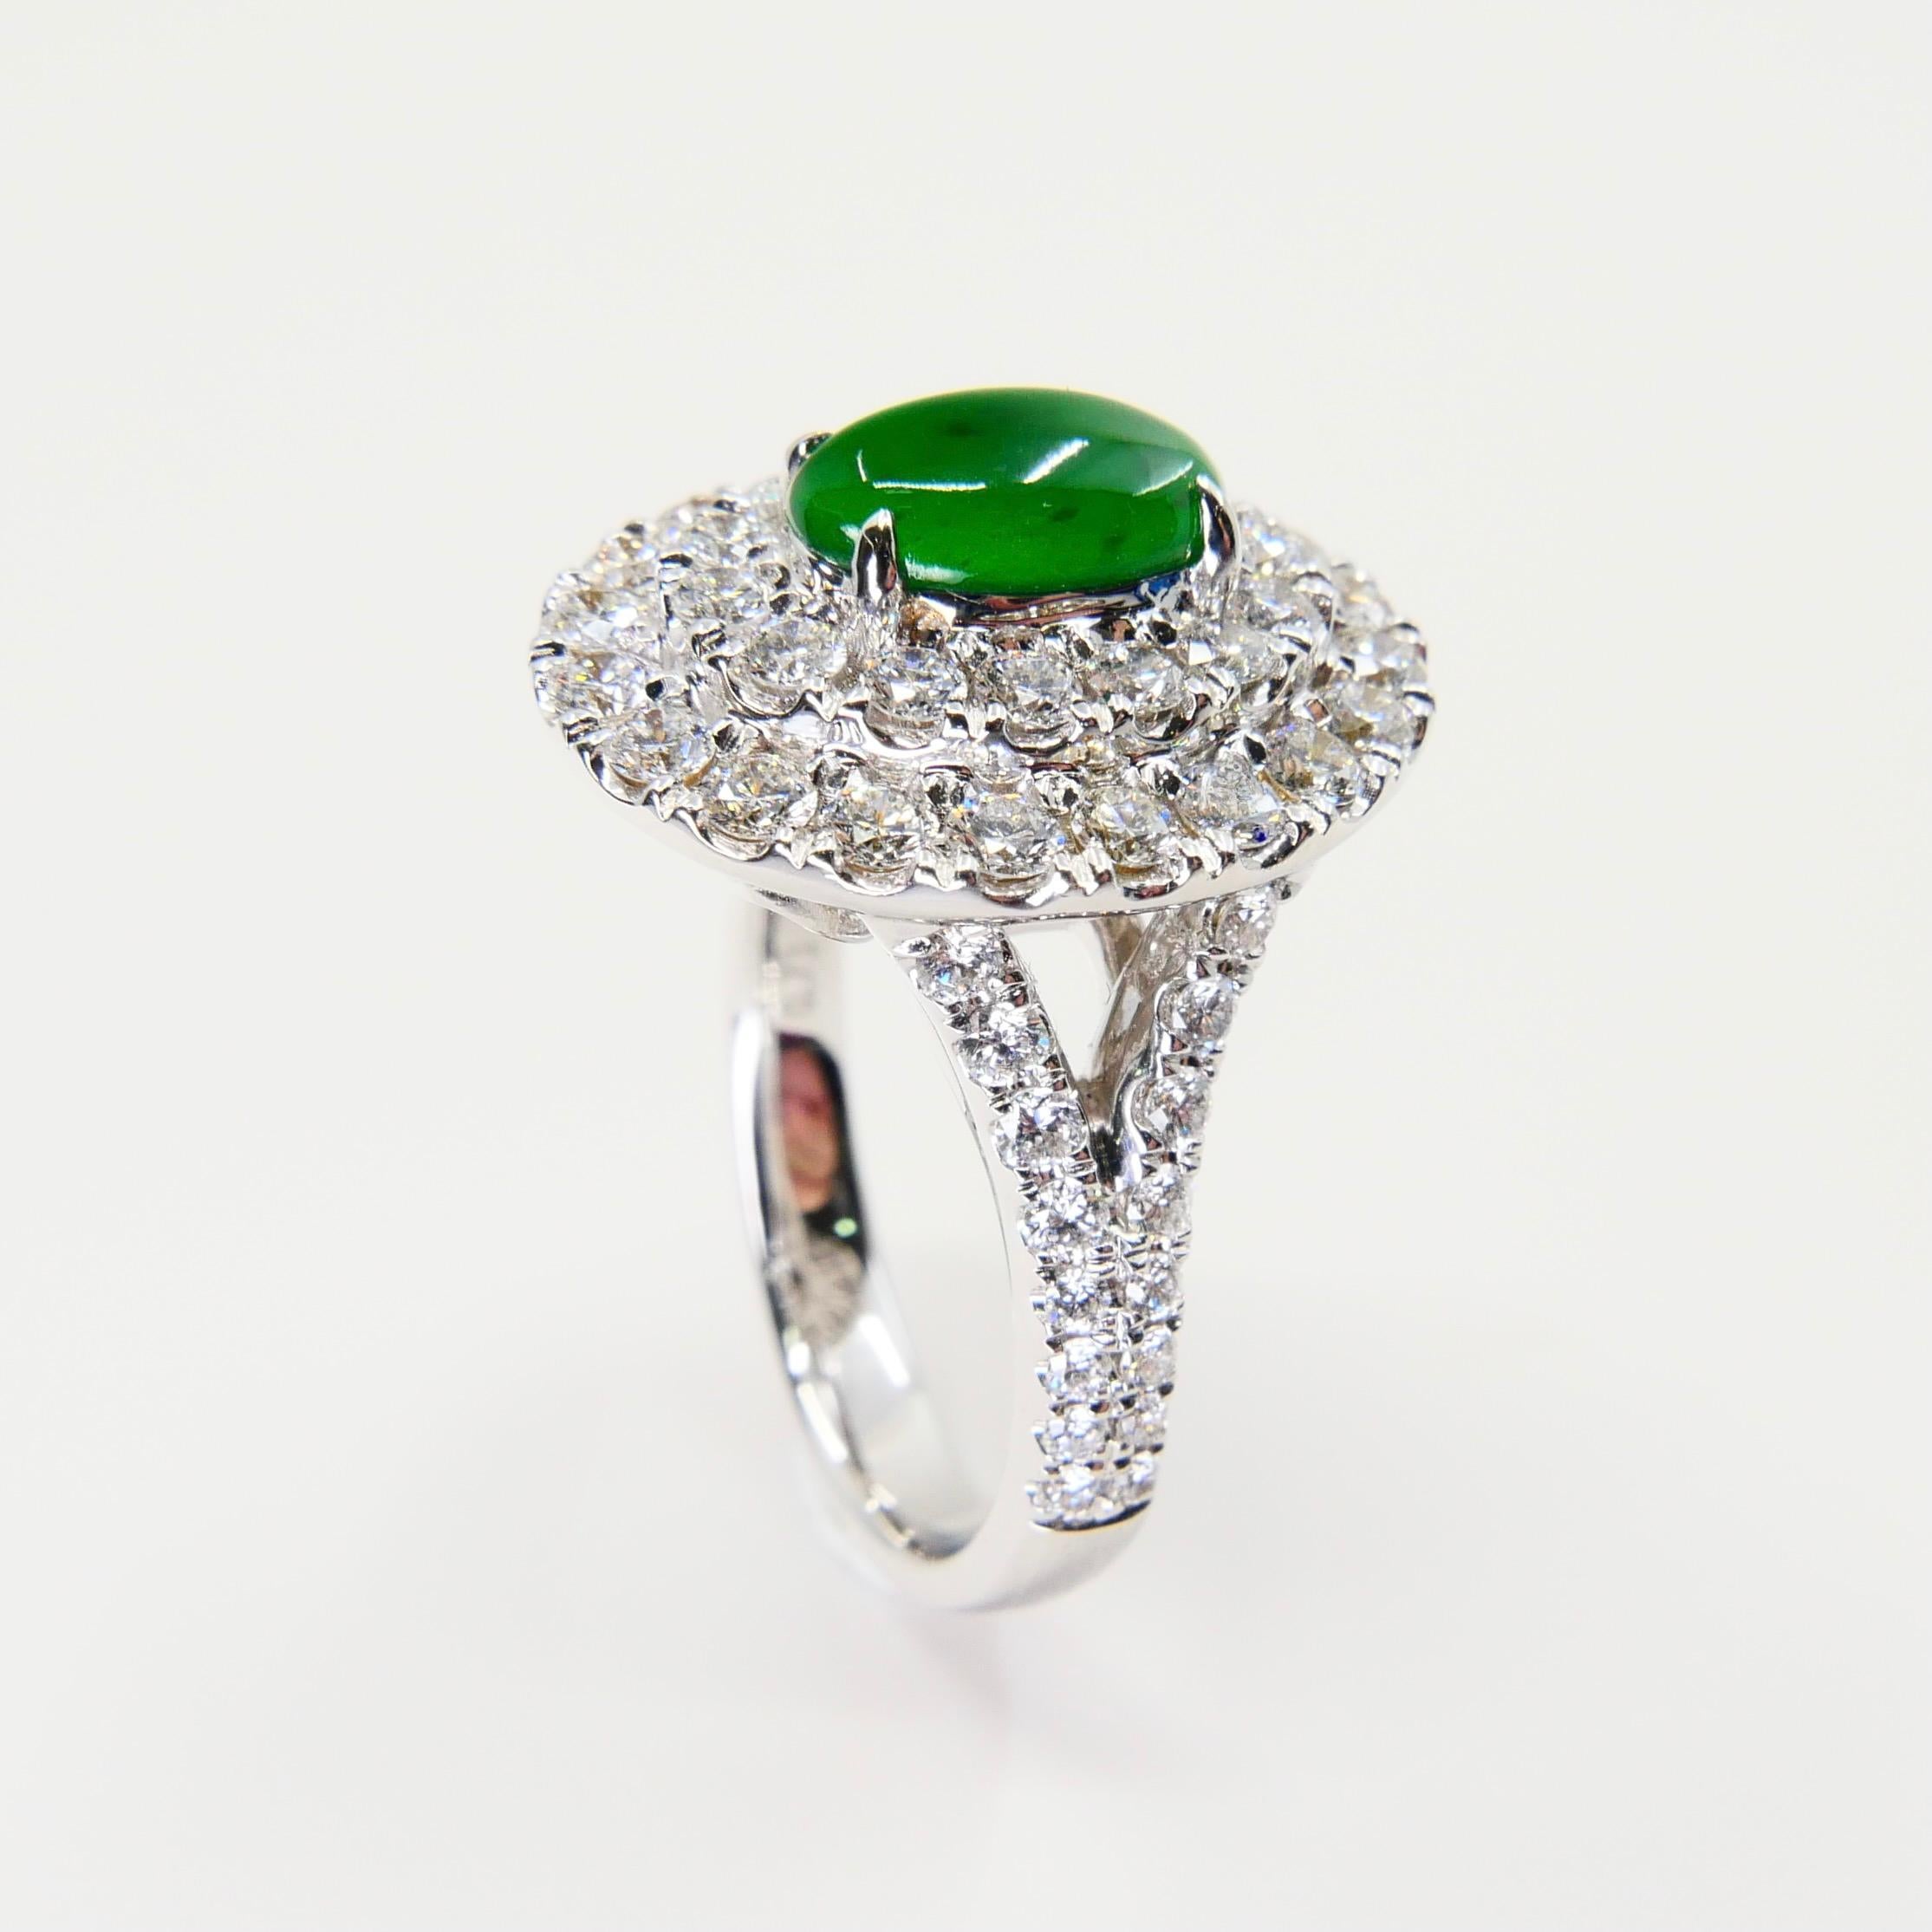 Contemporary Certified Type A Jadeite Jade and Diamond Cocktail Ring, Close to Imperial Jade